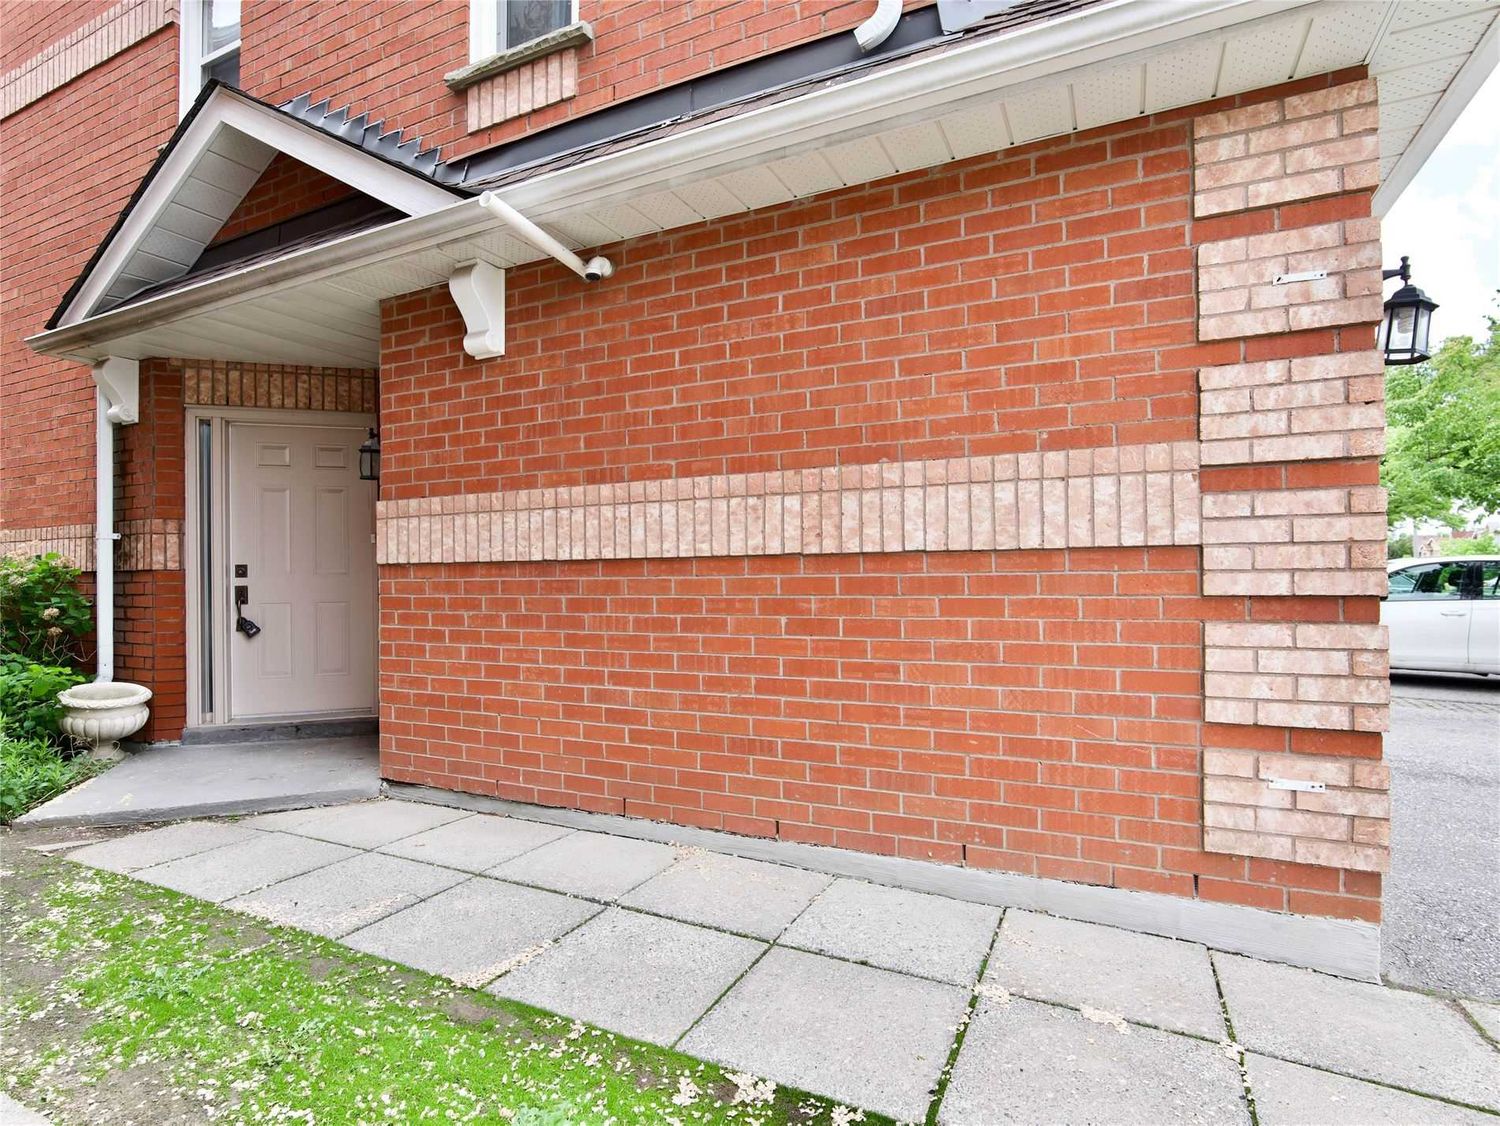 1-118 Leah Crescent. Leah Crescent Townhomes is located in  Vaughan, Toronto - image #3 of 3